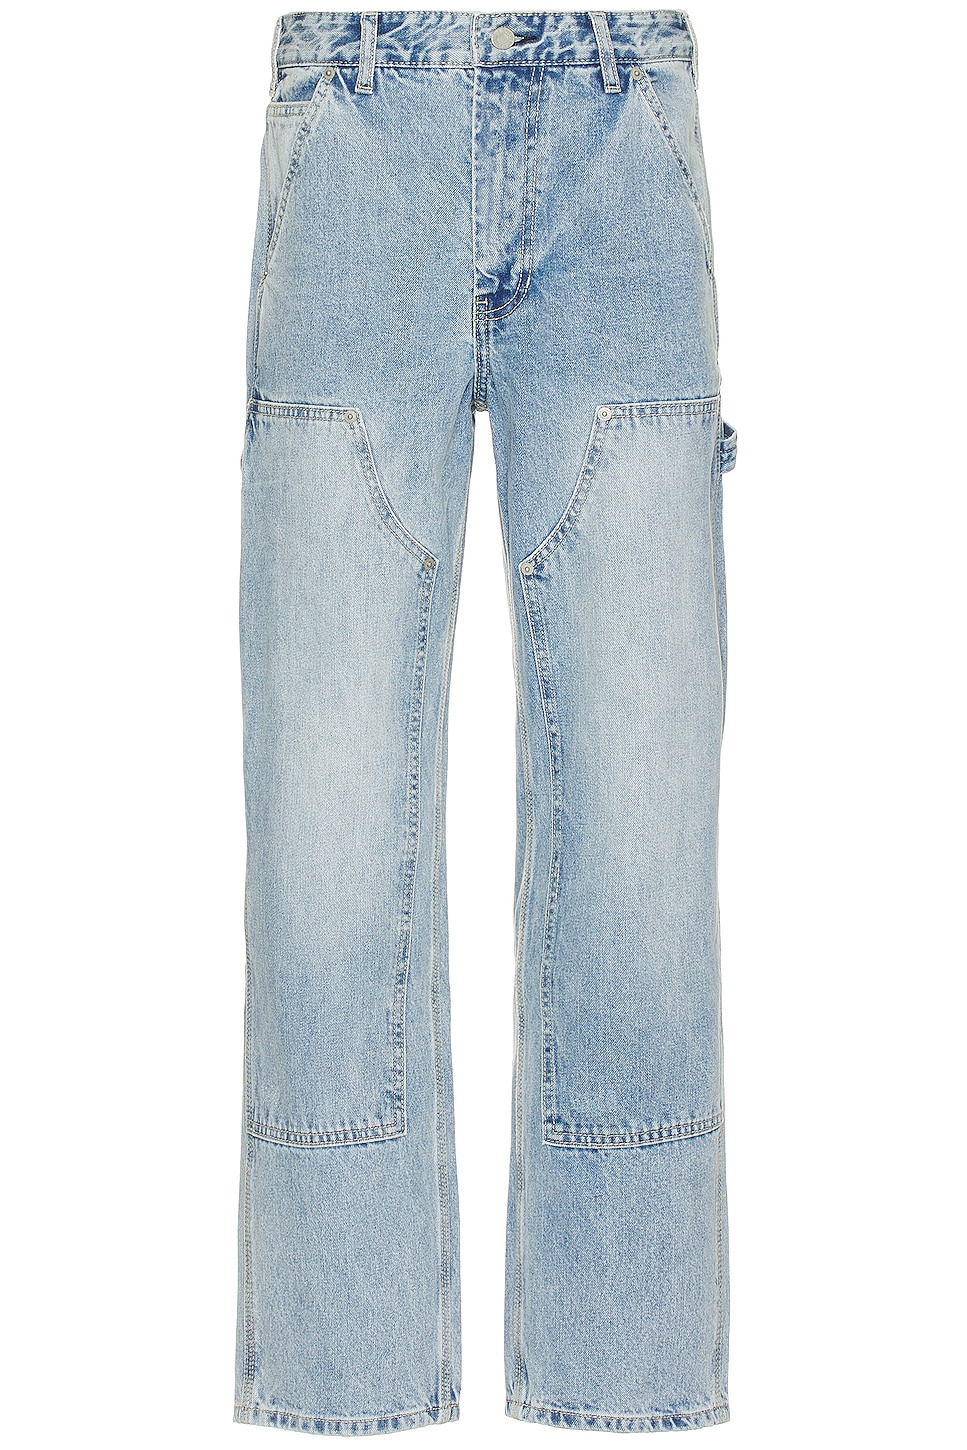 Image 1 of thisisneverthat Denim Carpenter Pant in Washed Blue